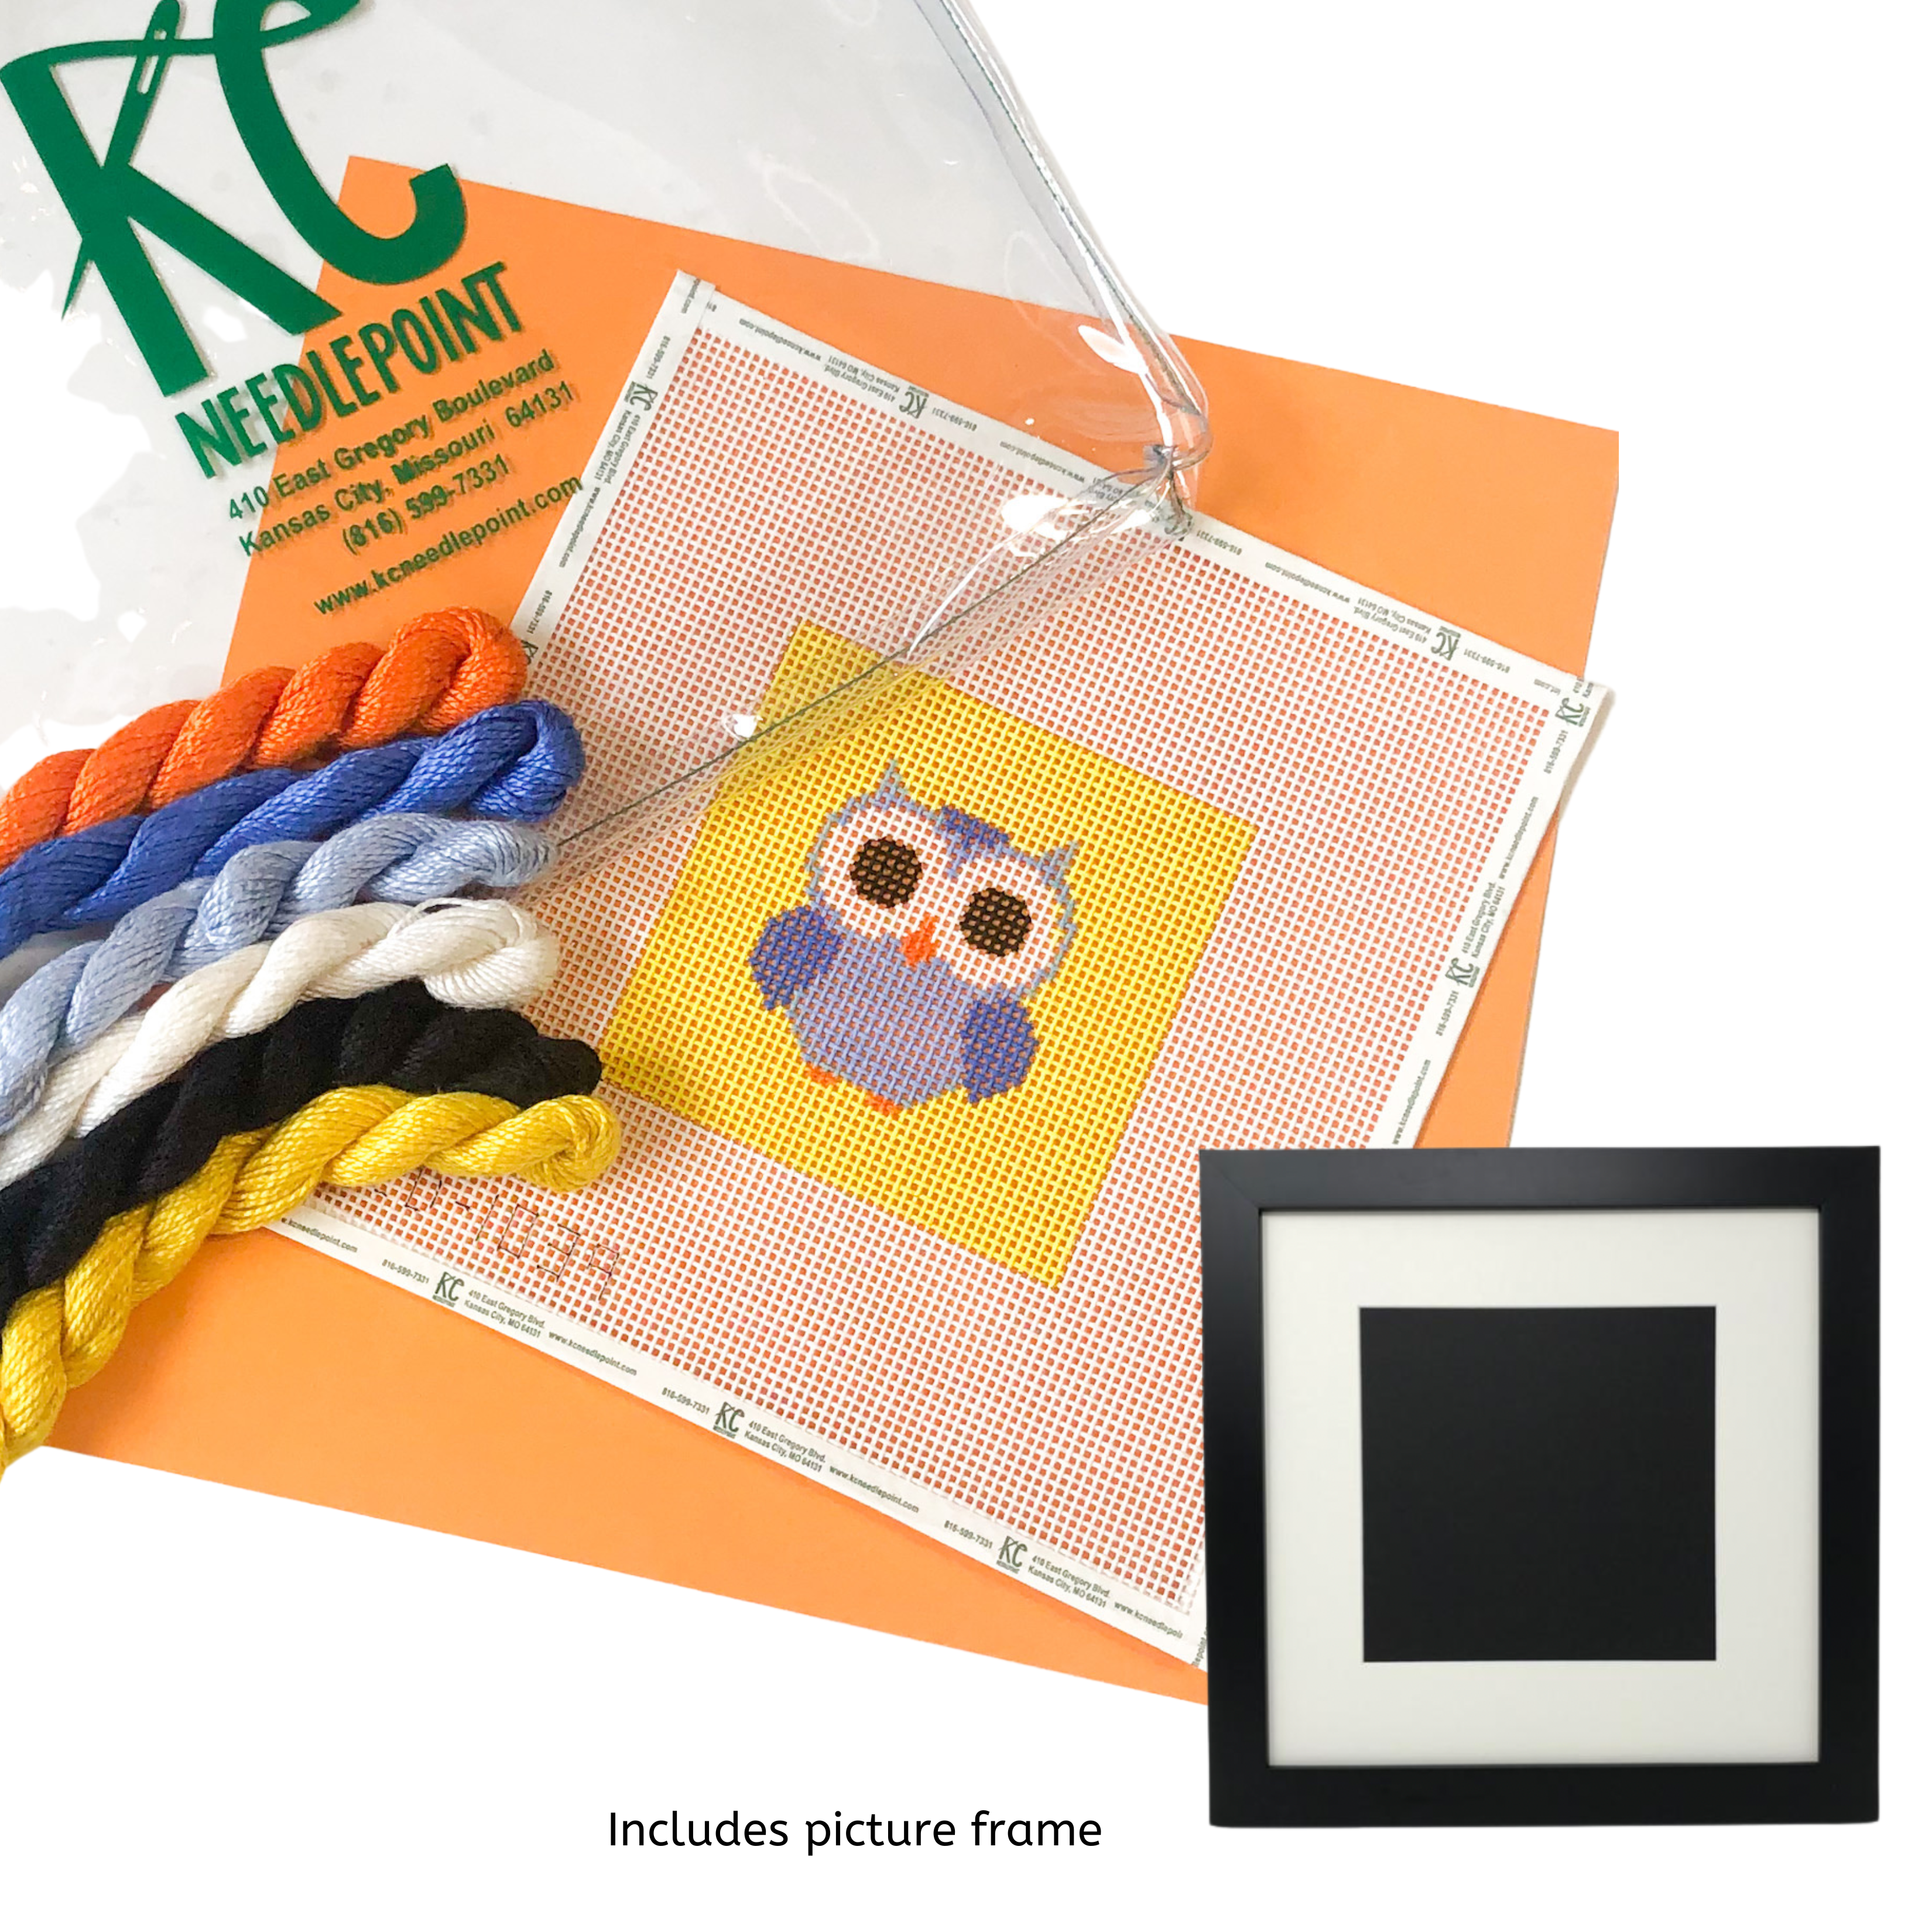 A beginner needlepoint kit of an owl which is suitable for kids and adults  learning how to needlepoint. The design is color-printed onto 10 mesh  canvas and measures 4 x 4. The